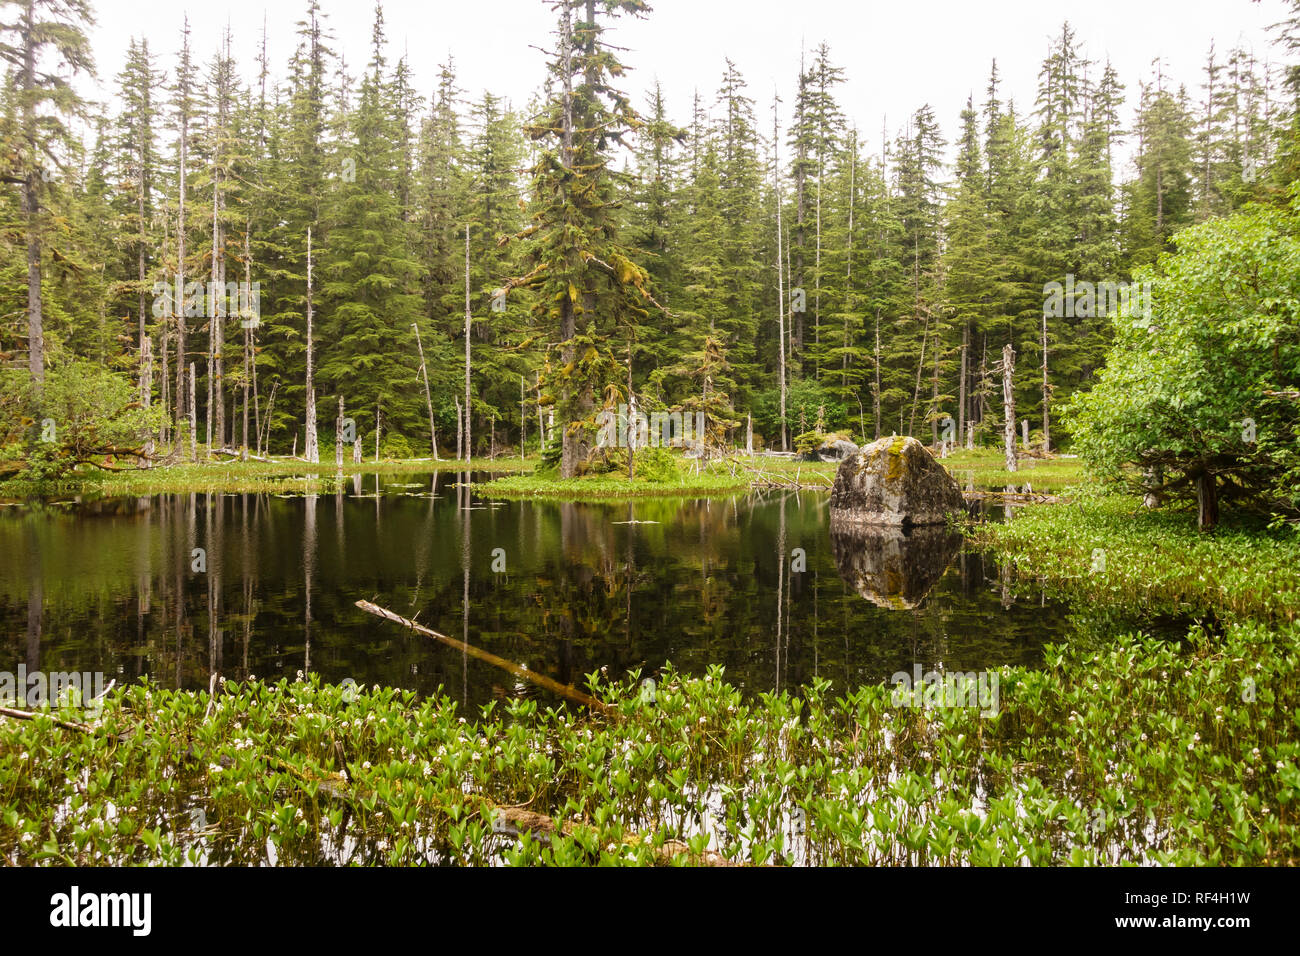 Wetland plants and a glacial erratic boulder in Blackwater Pond near Bartlett Cove, Glacier Bay National Park, Alaska. Spruce forest surrounds this pr Stock Photo